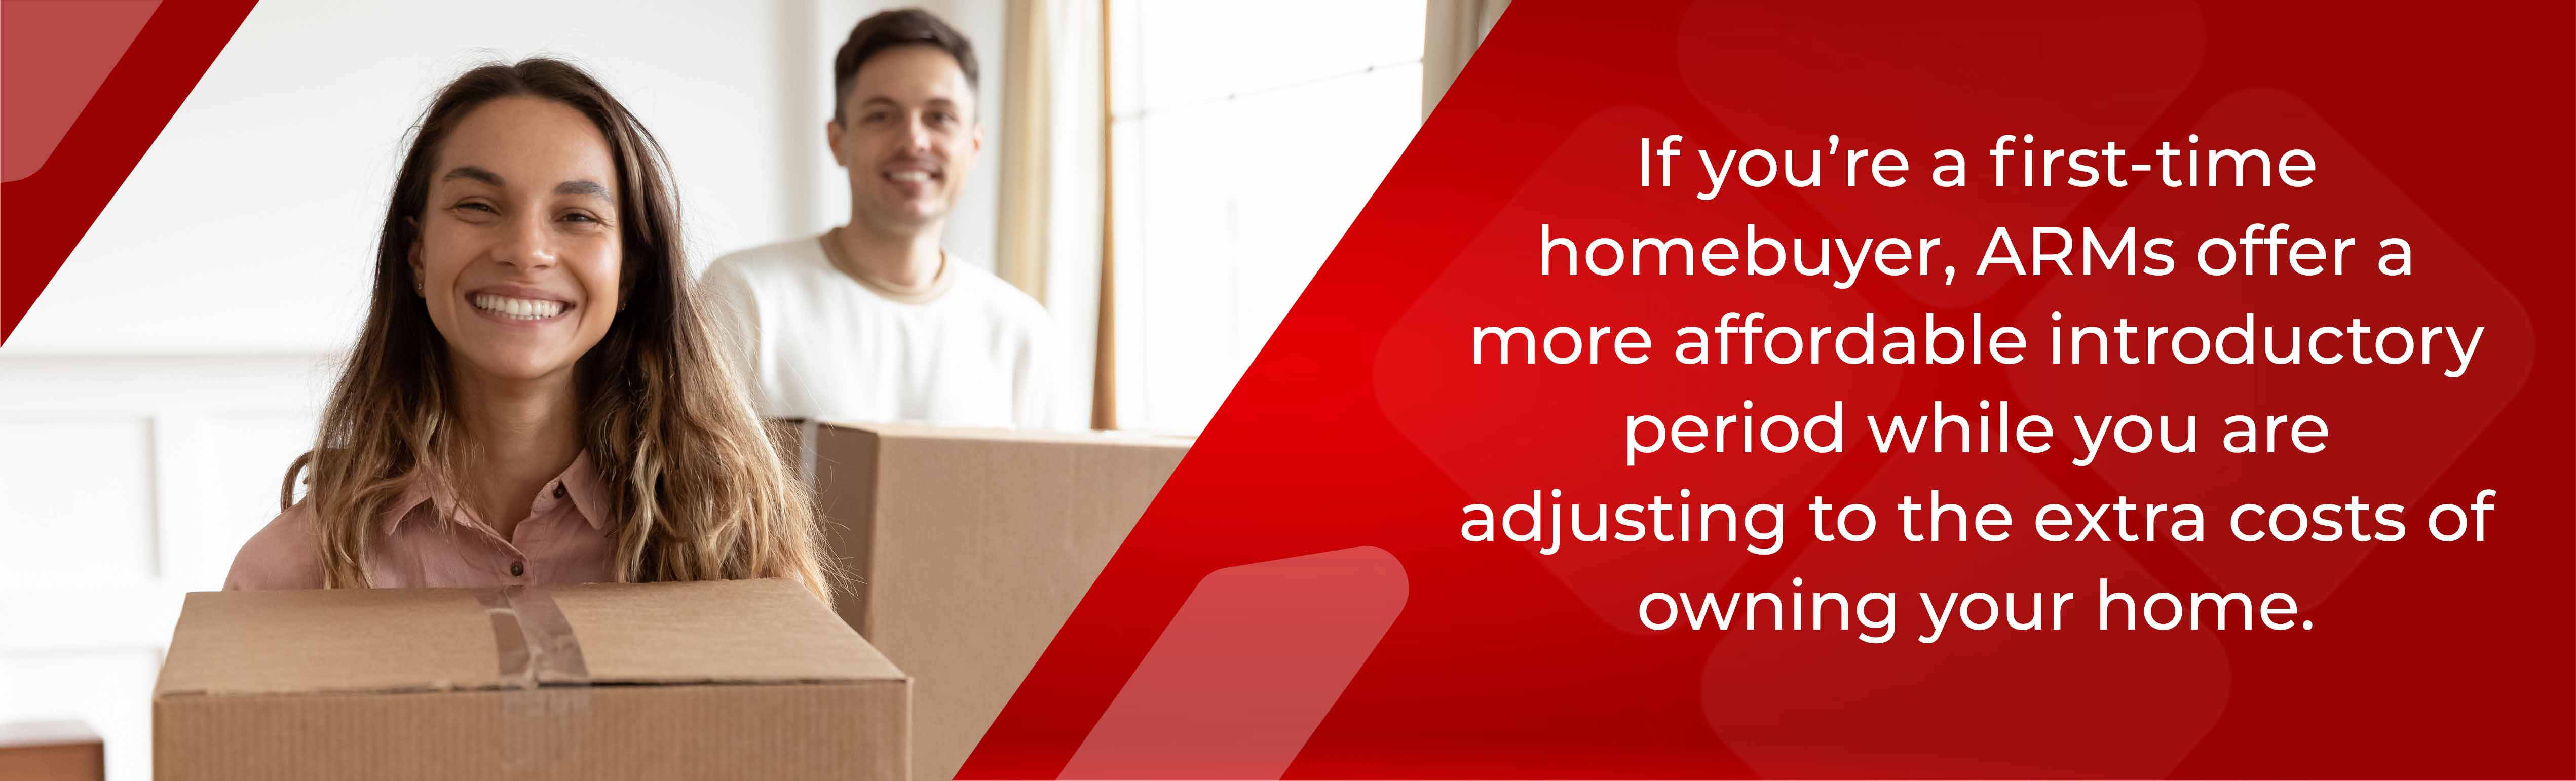 If you're a first time homebuyer, ARMs offer a more affordable introductory period while you are adjusting to the extra costs of owning  your home.